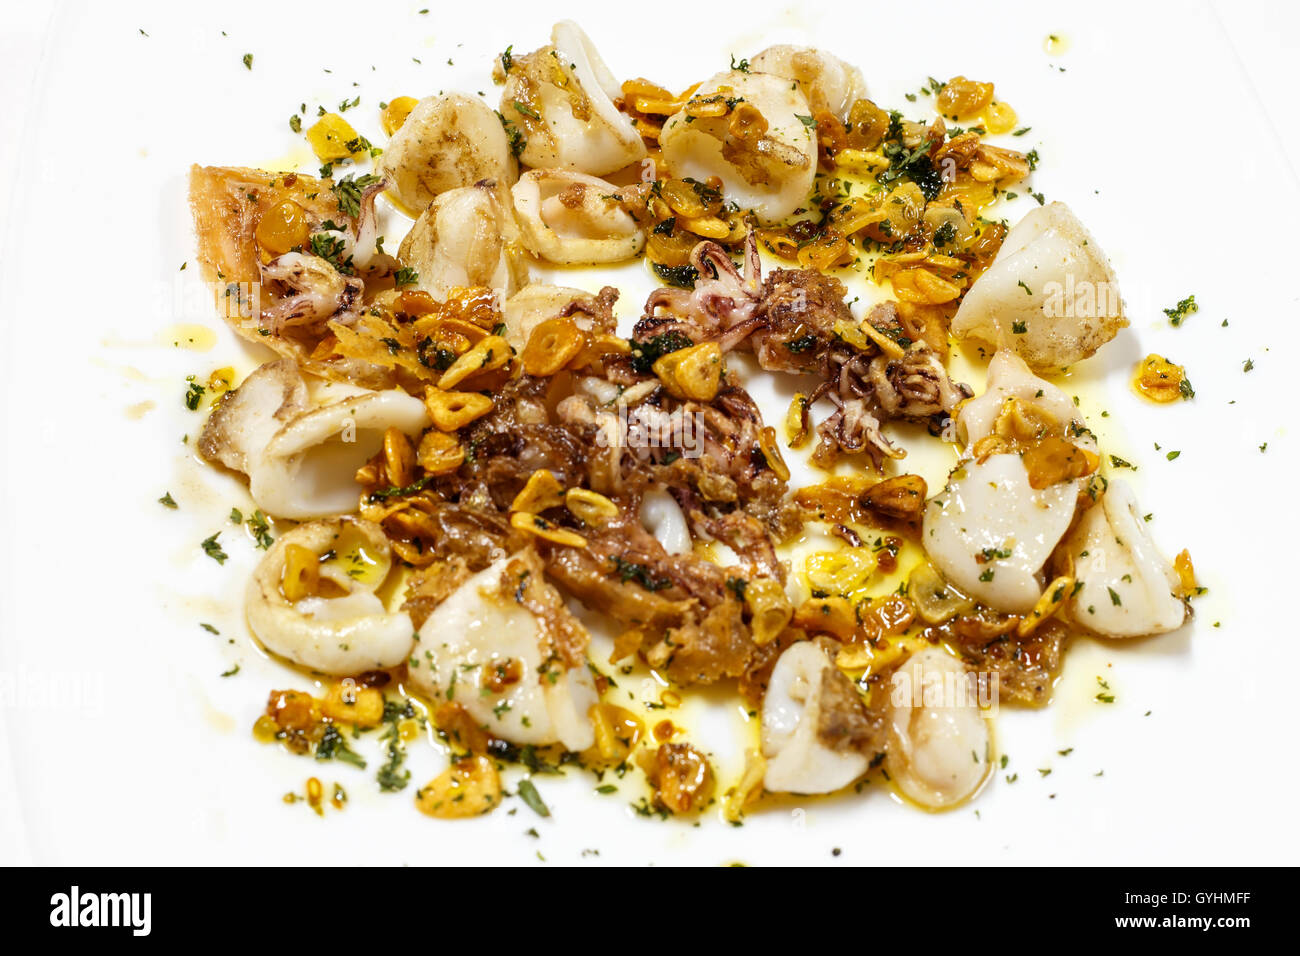 cooked squid plate with olive oil Stock Photo